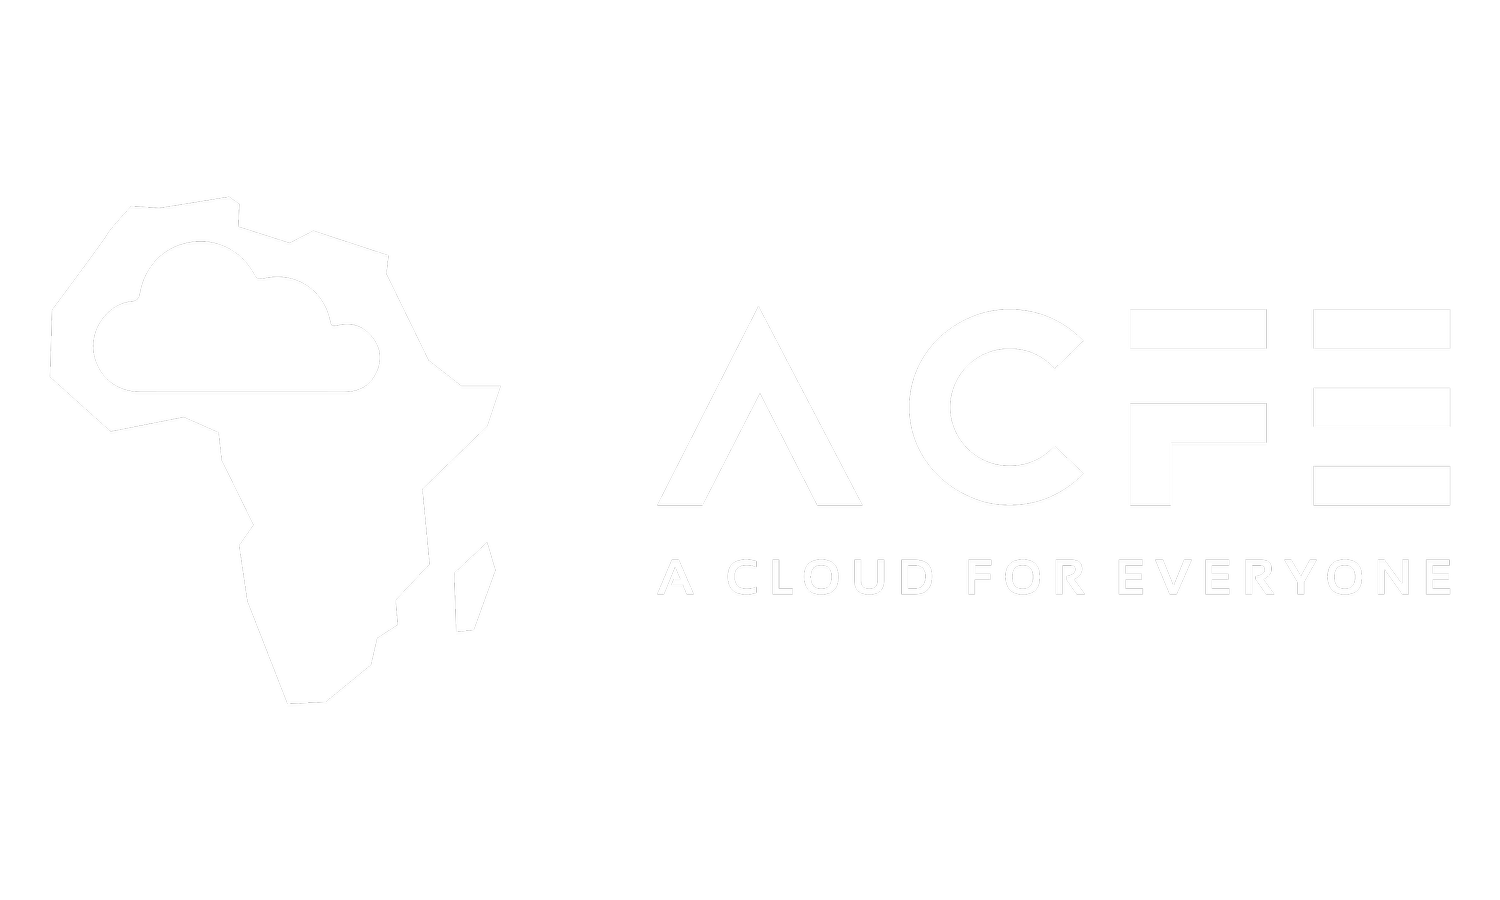 A Cloud For Everyone